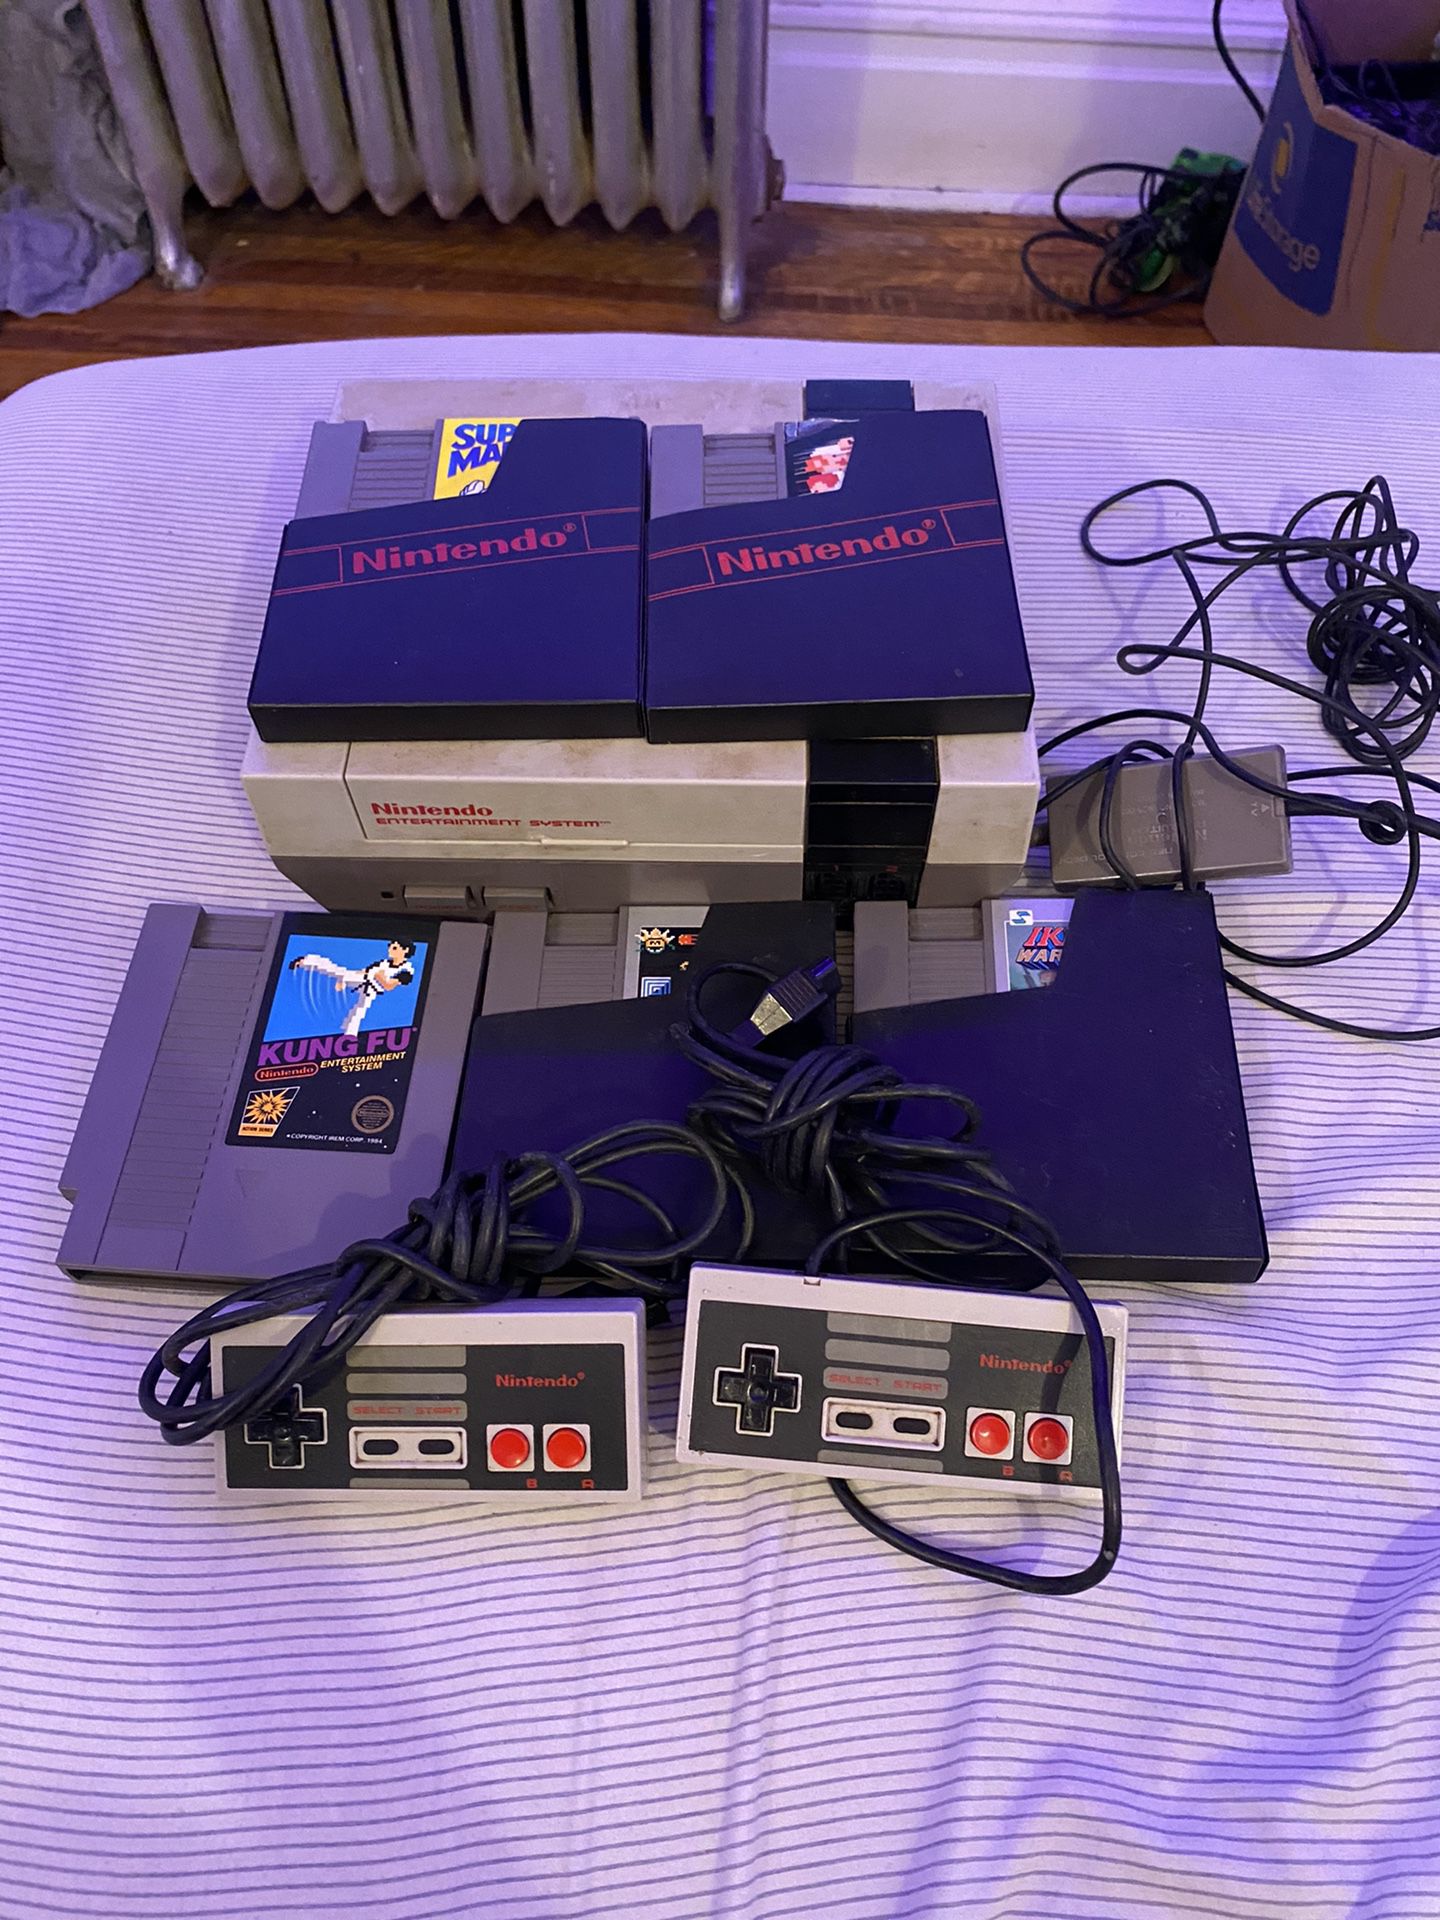 NES 2 controllers, 5 games